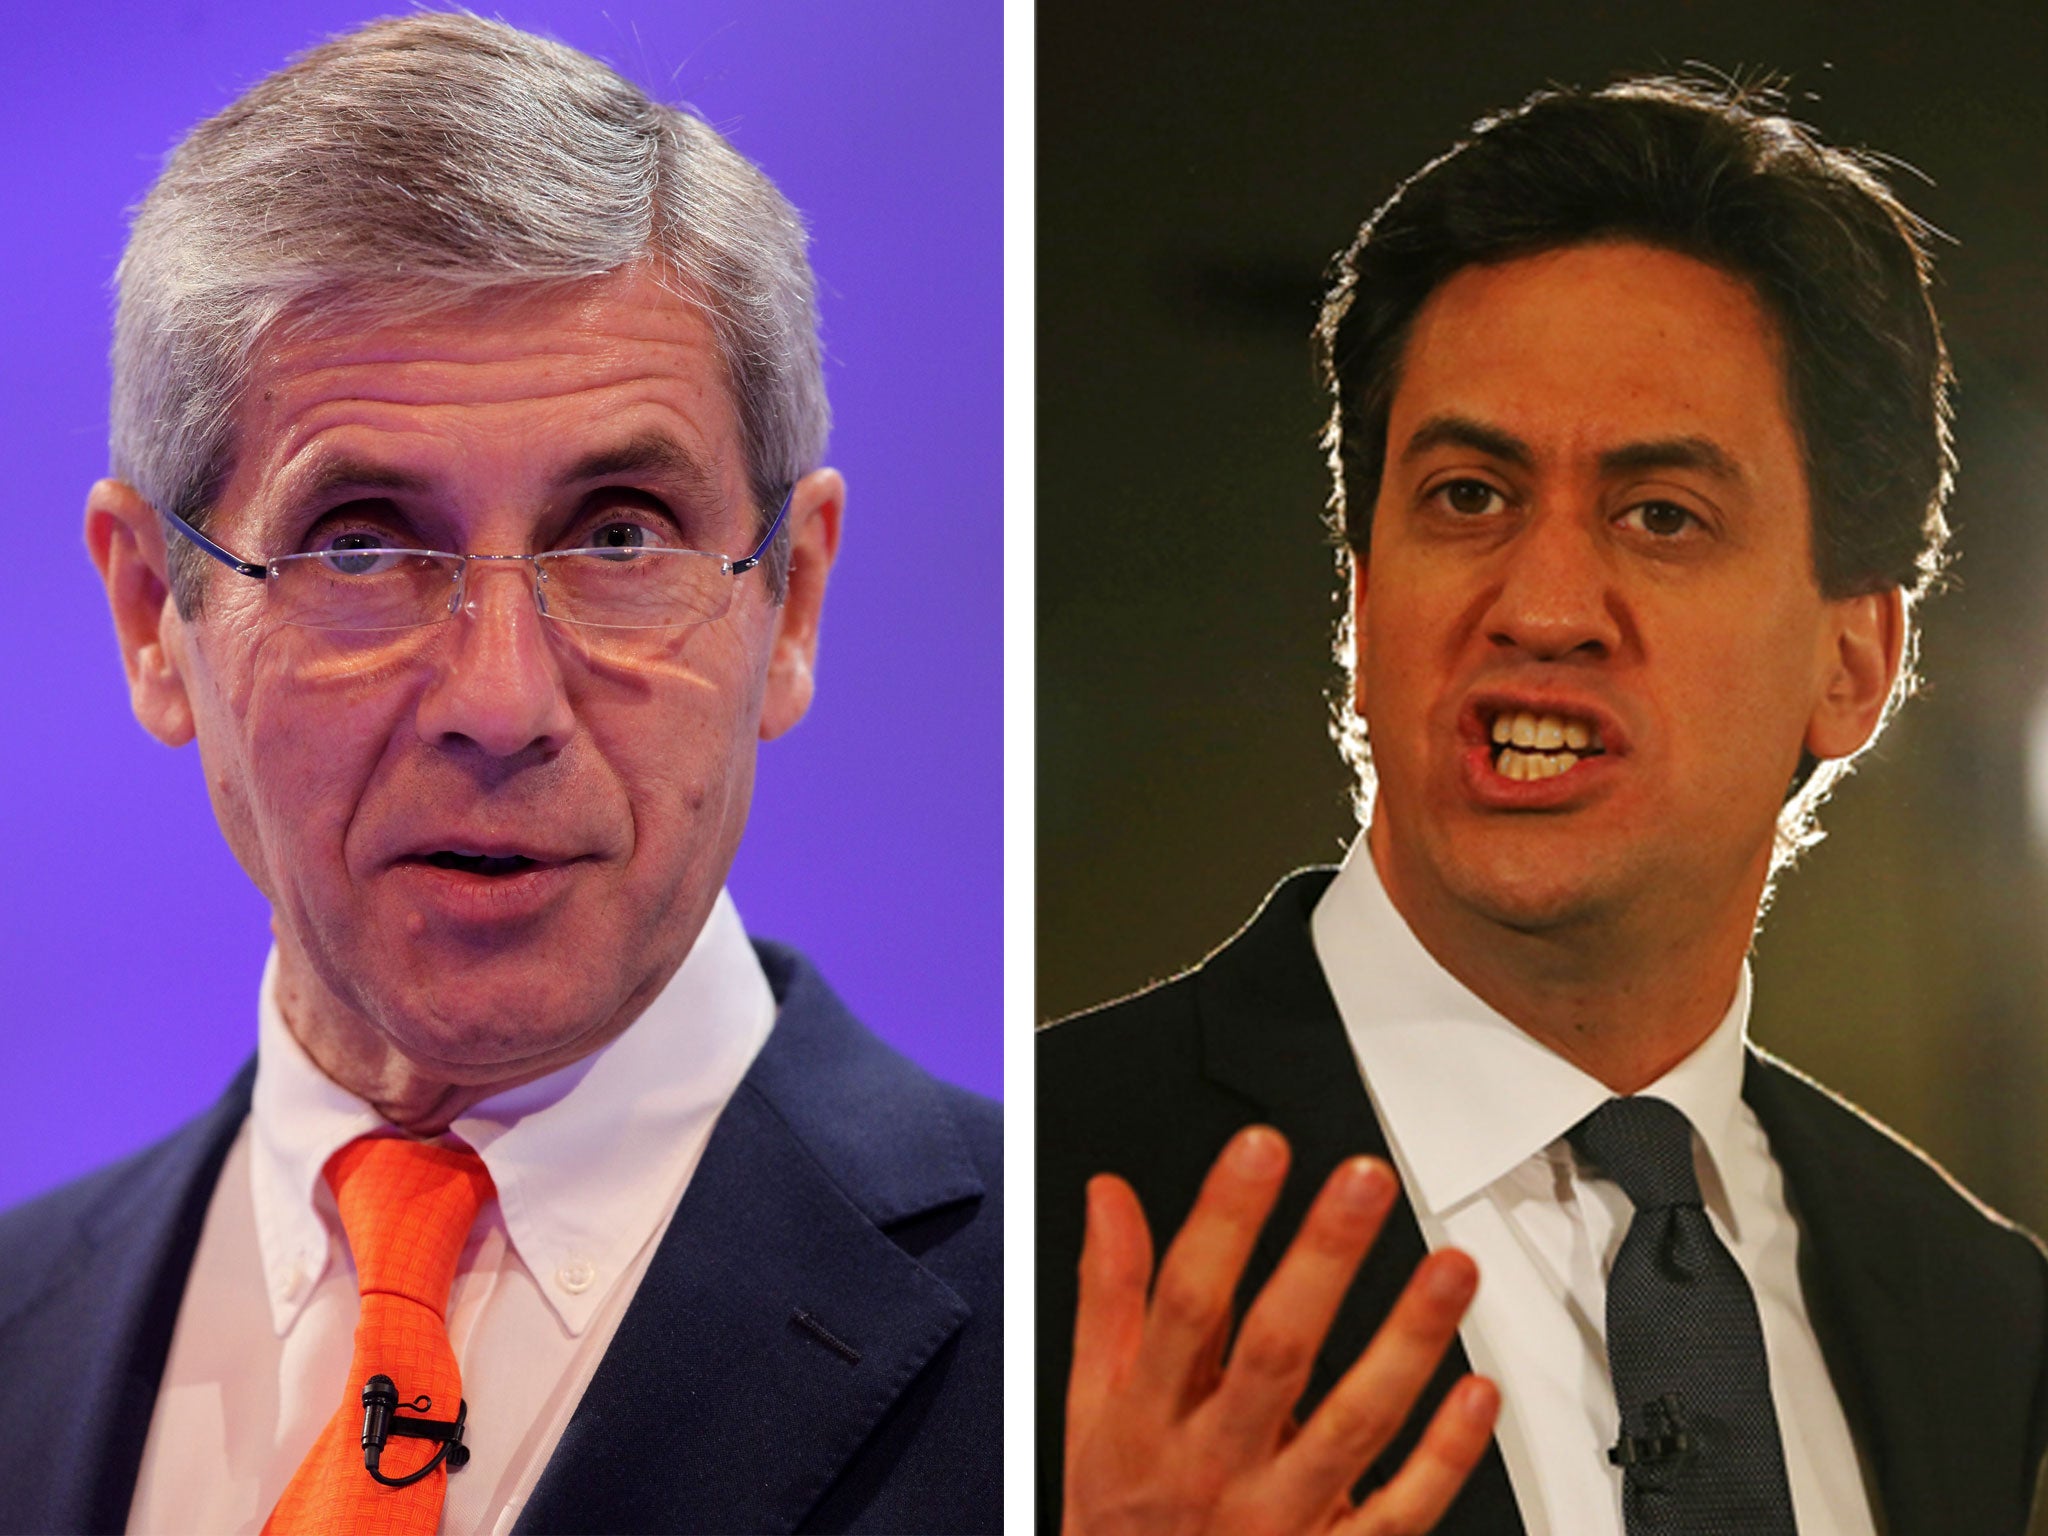 Lord Rose has accused Ed Miliband of dragging the Labour party back to the Seventies